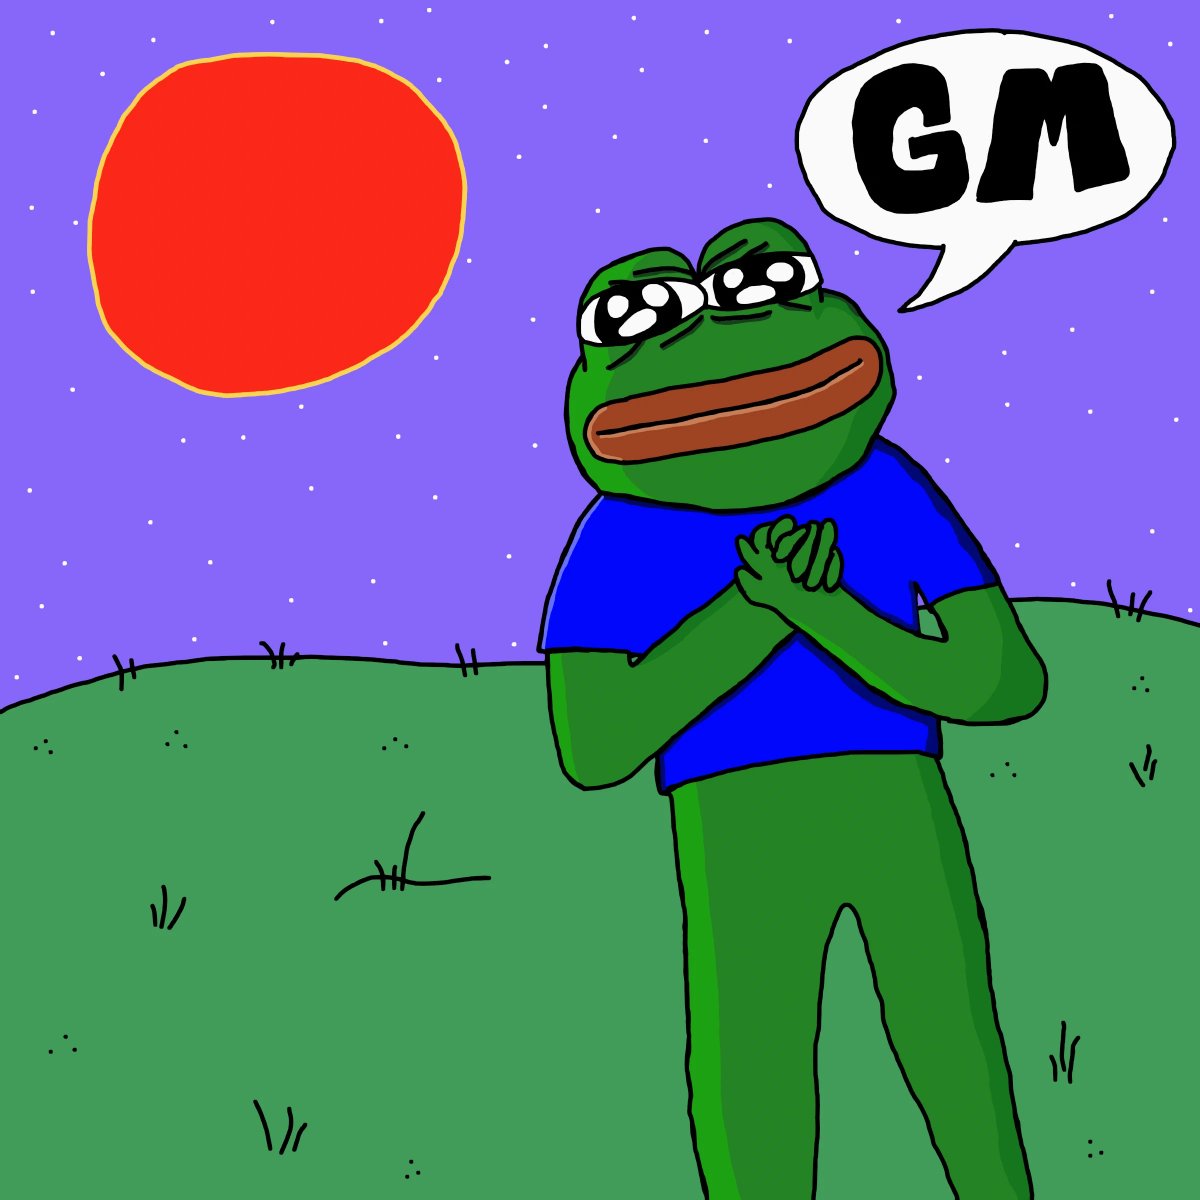 Can I get a GM Frens?